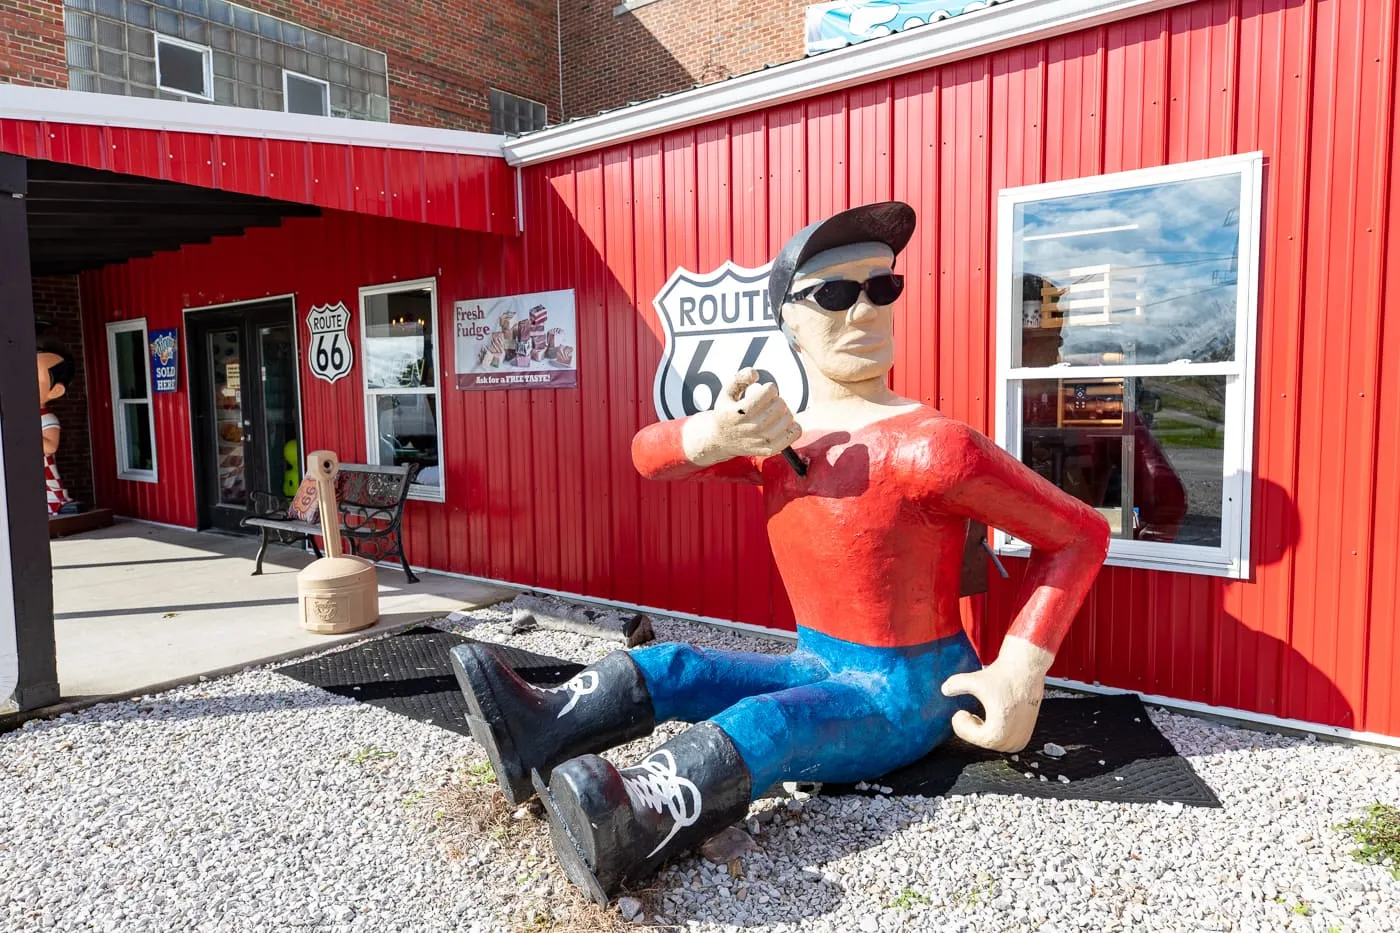 Fiberglass boy at the Pink Elephant Antique Mall in Livingston, Illinois - Route 66 Roadside Attraction